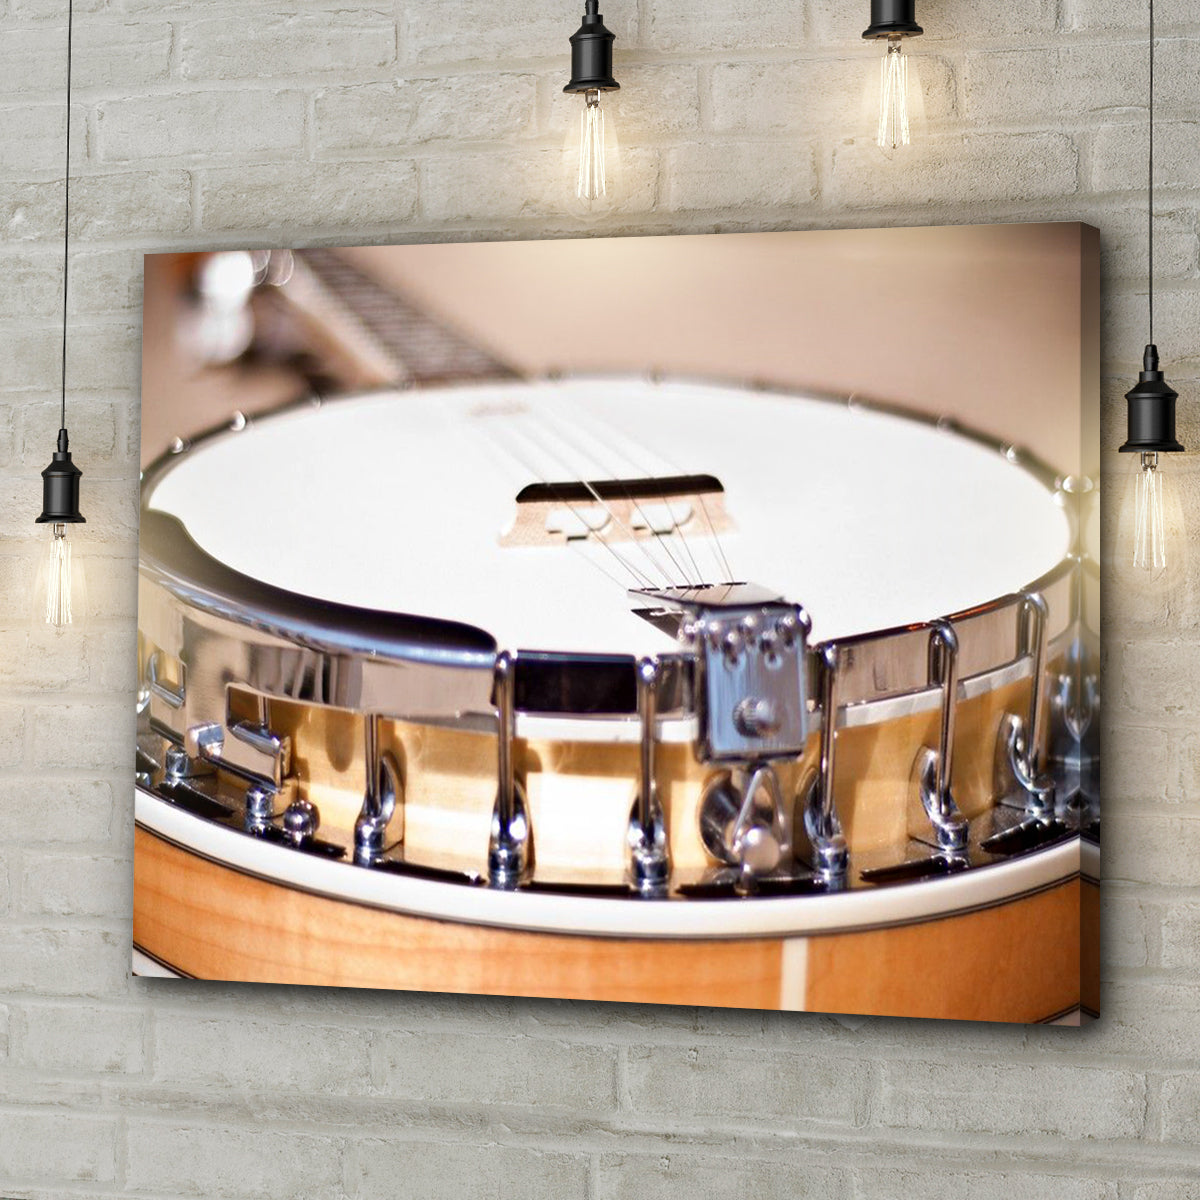 Banjo Modern Canvas Wall Art - Image by Tailored Canvases